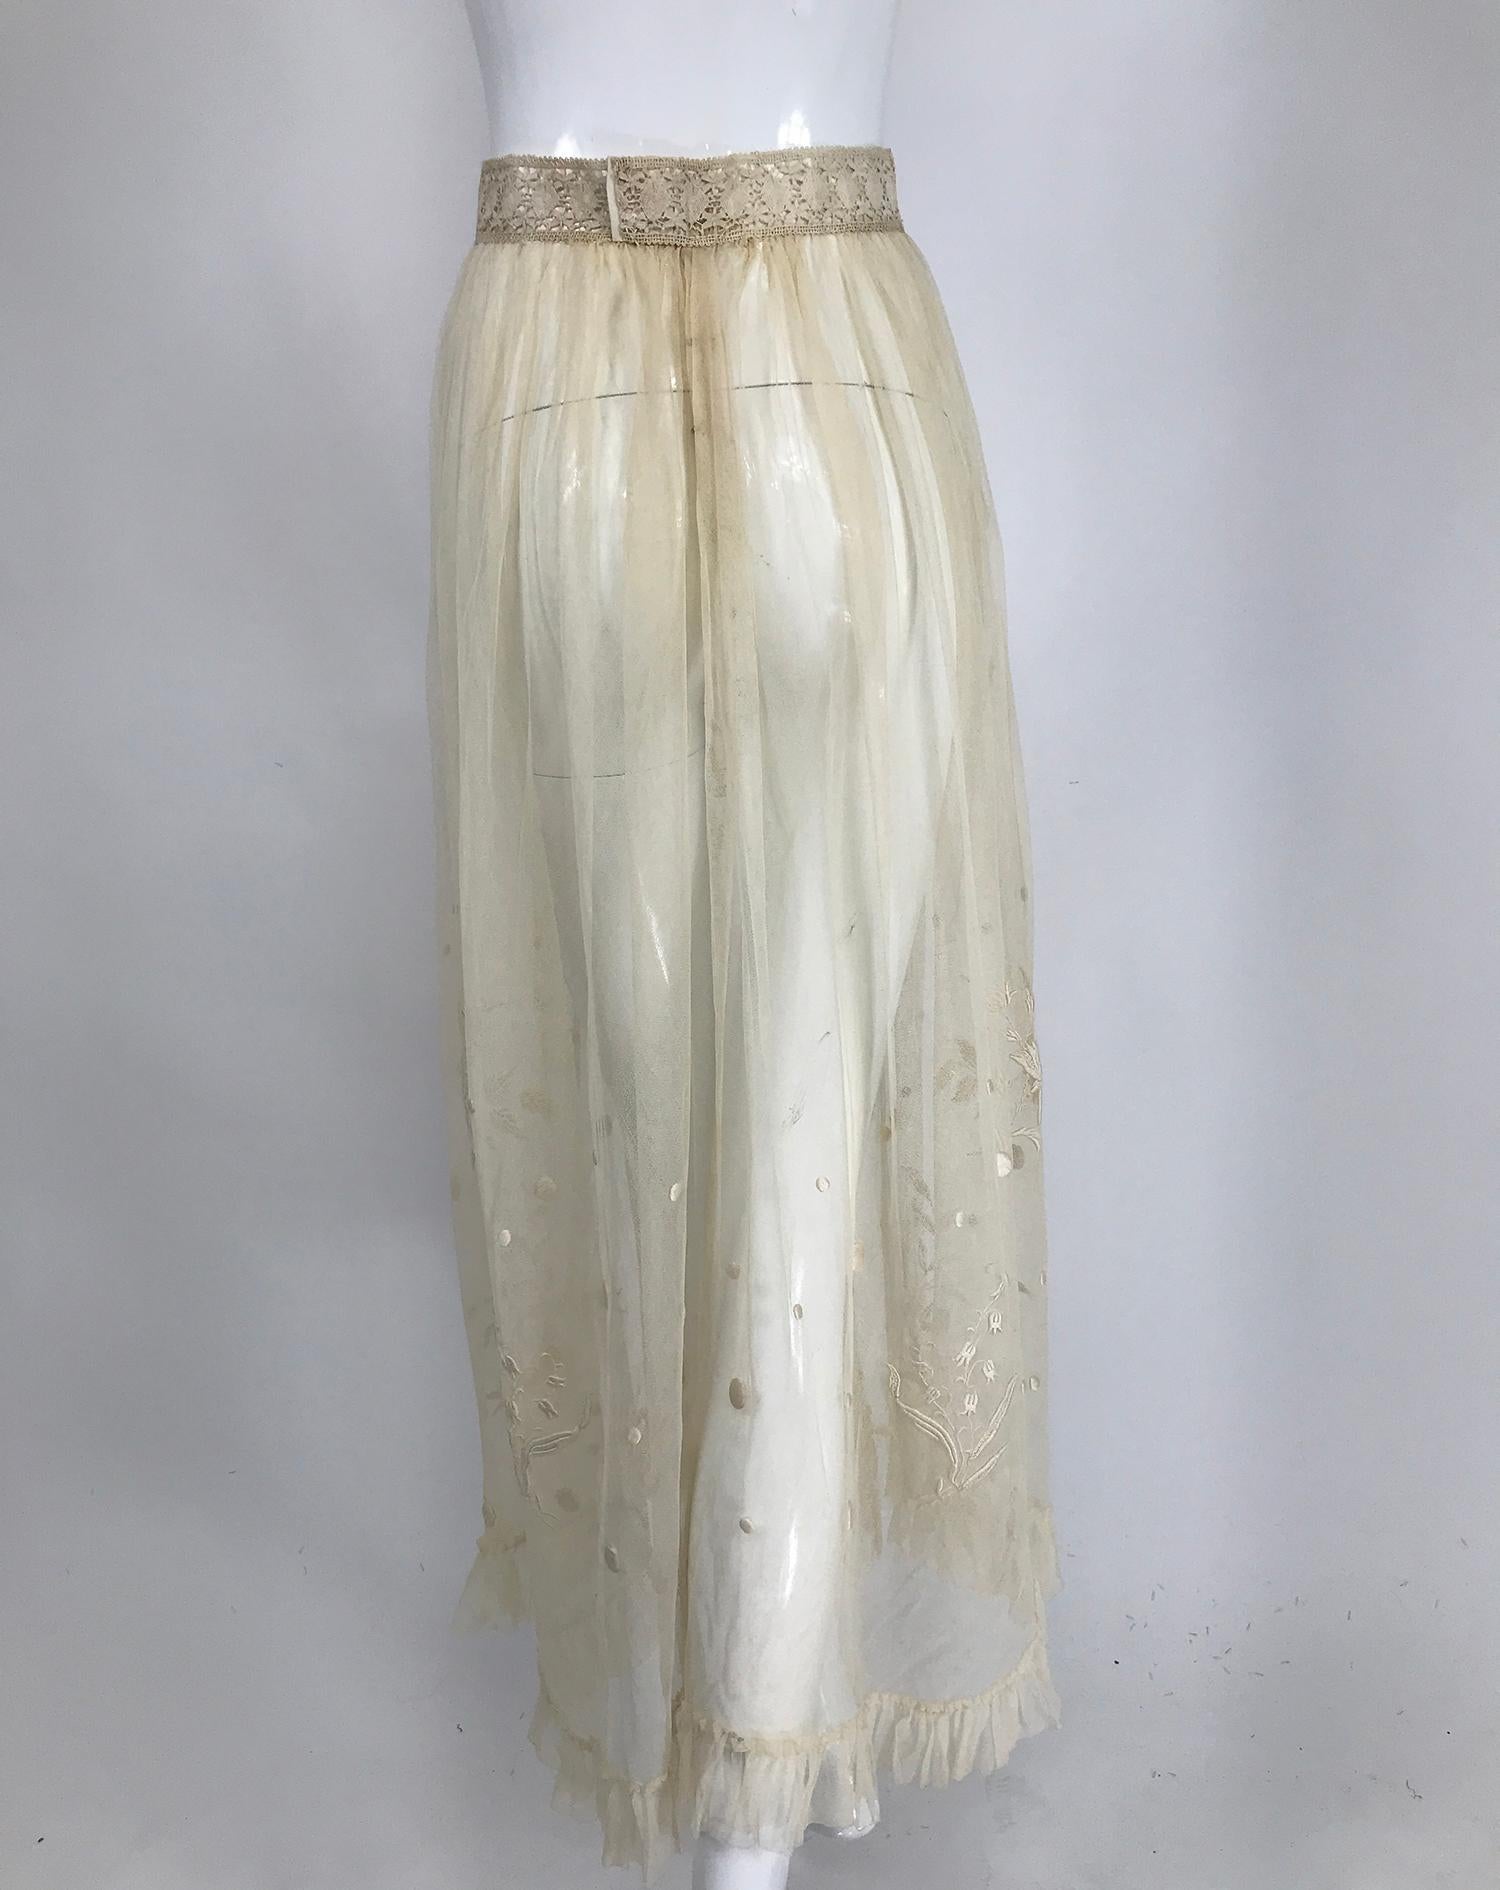 Edwardian Ecru Satin Stitch Embroidered Tulle Skirt 1900s In Excellent Condition For Sale In West Palm Beach, FL